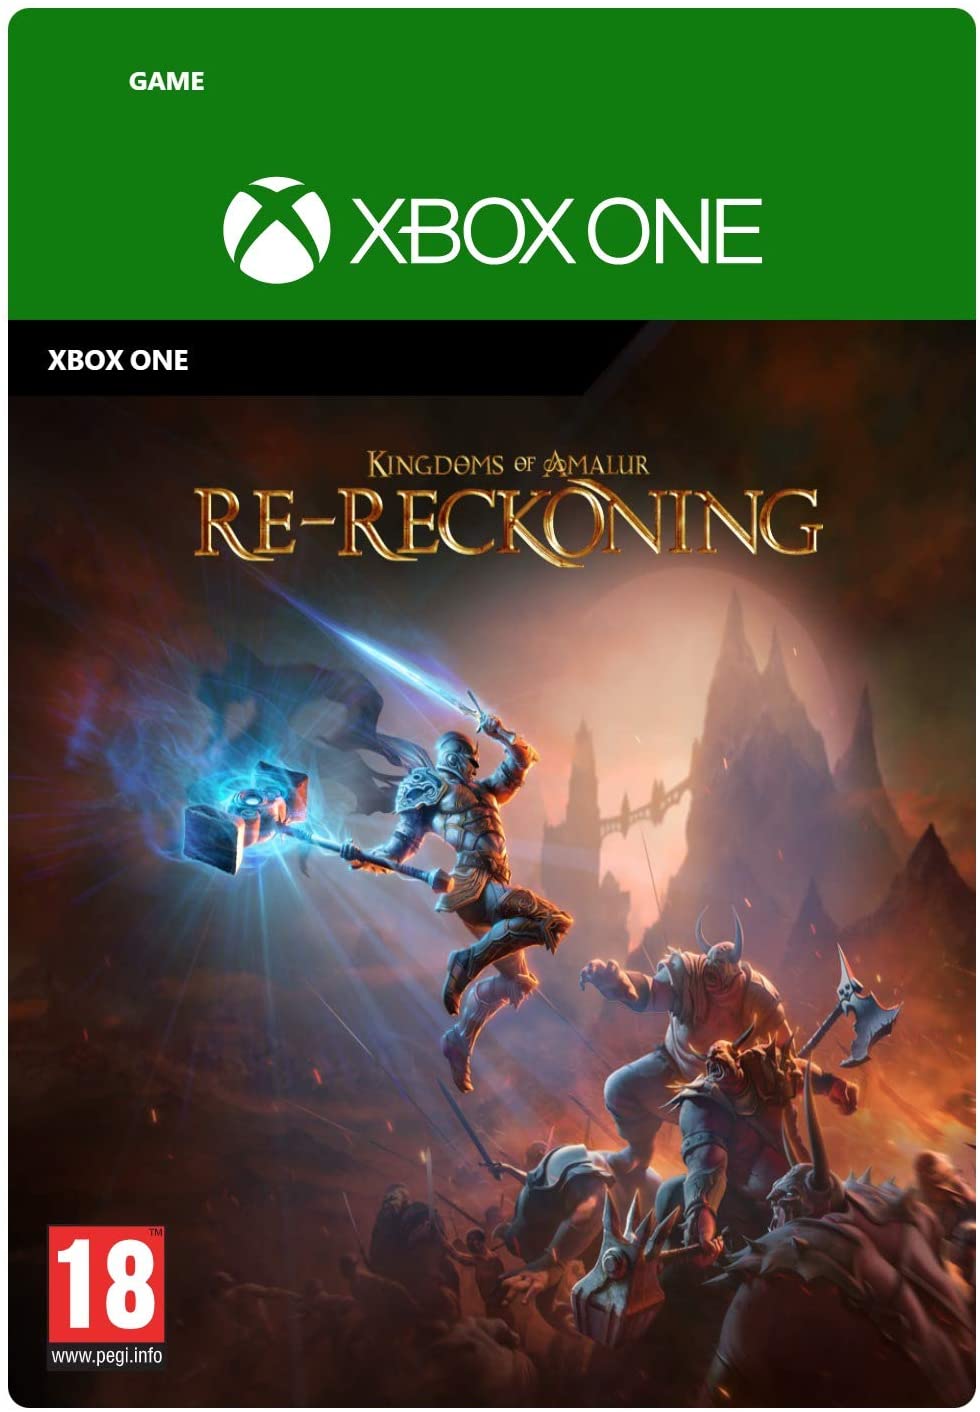 Kingdoms of Amalur Re-Reckoning VPN ACTIVATED Key (Xbox One)